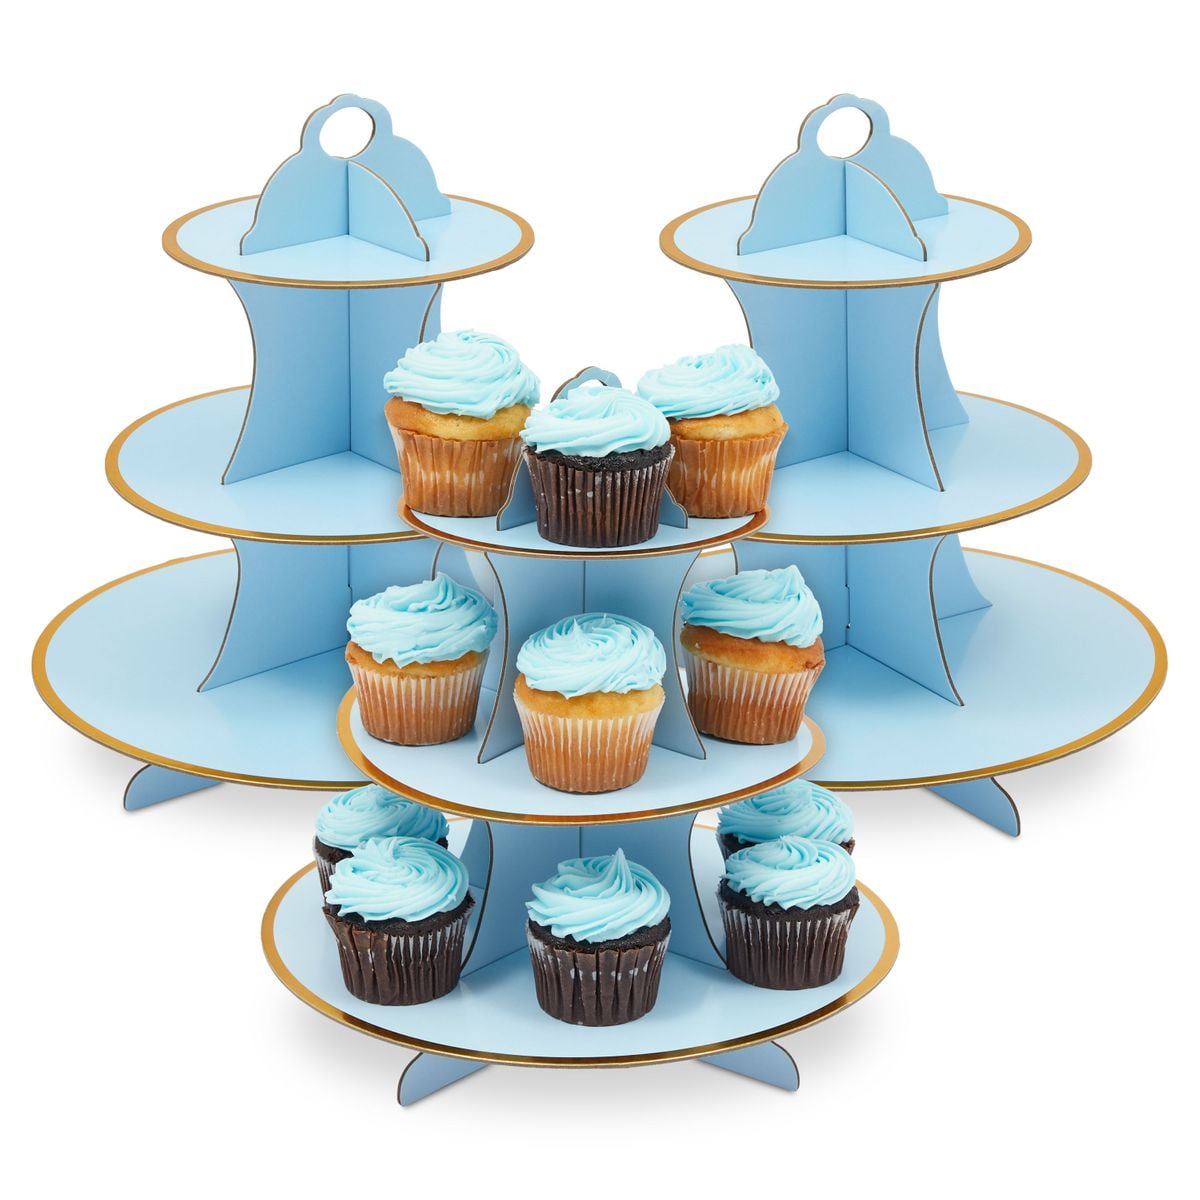 Details about   WILTON TOWERING TIERS CAKE CUPCAKE STAND REPLACEMENT PART 5.5" Tall Center Post 